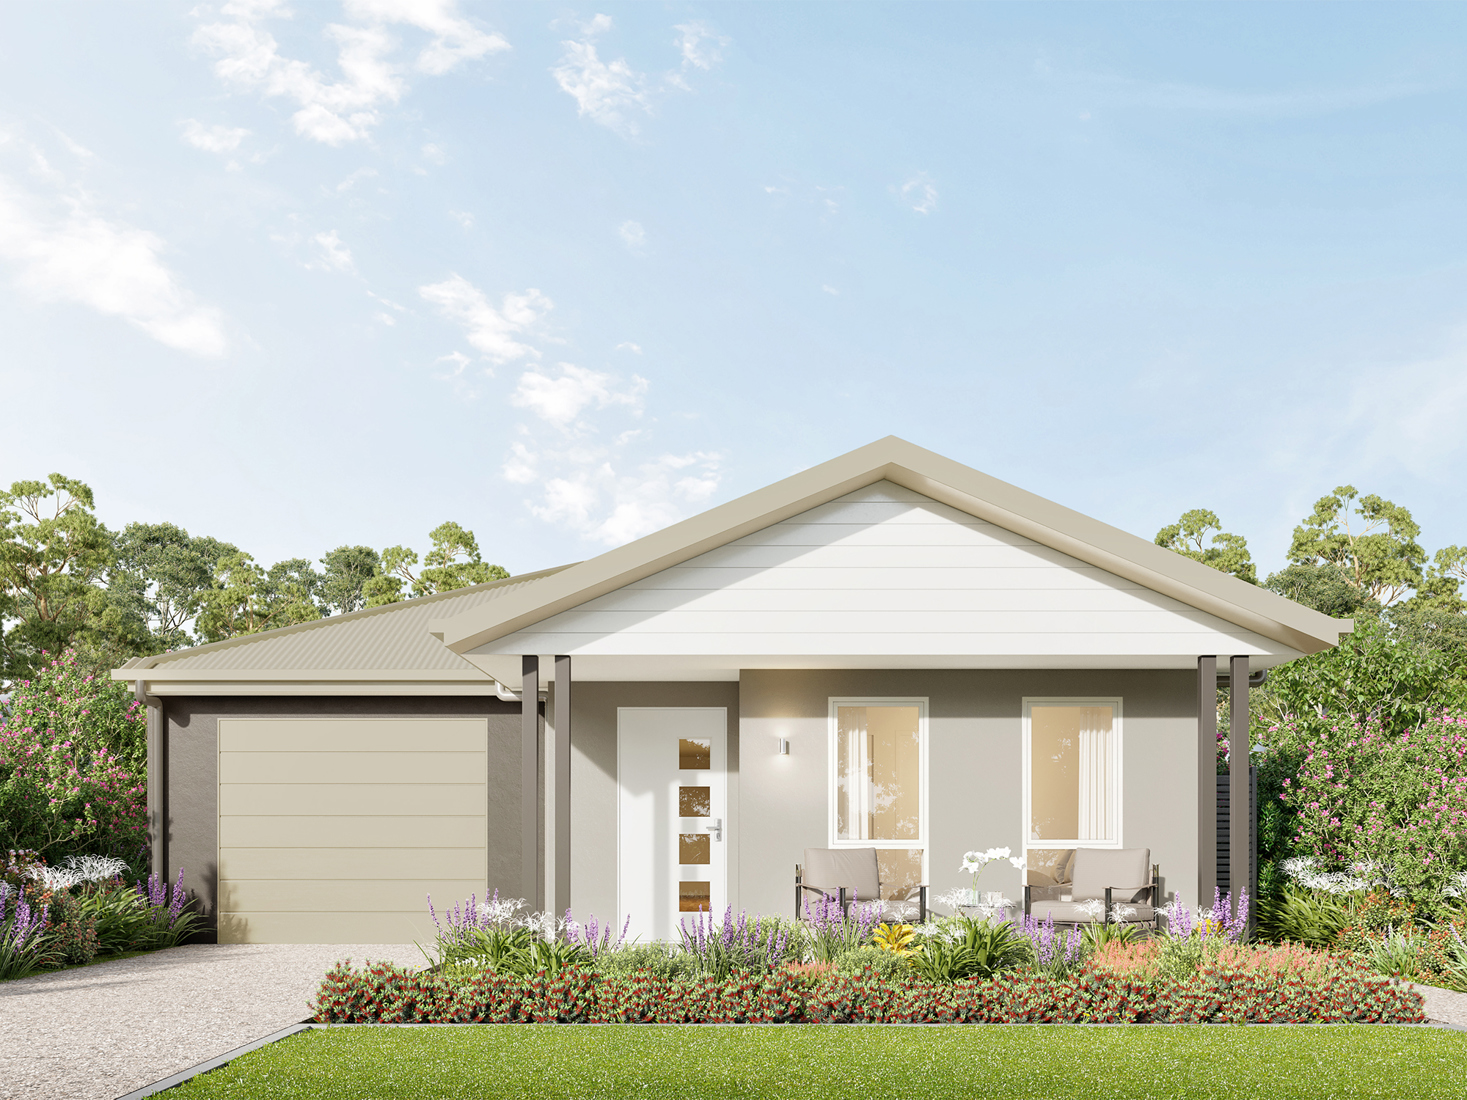 Facade render of the Allora house design with a Gable facade located at Stockland Halcyon Rise.